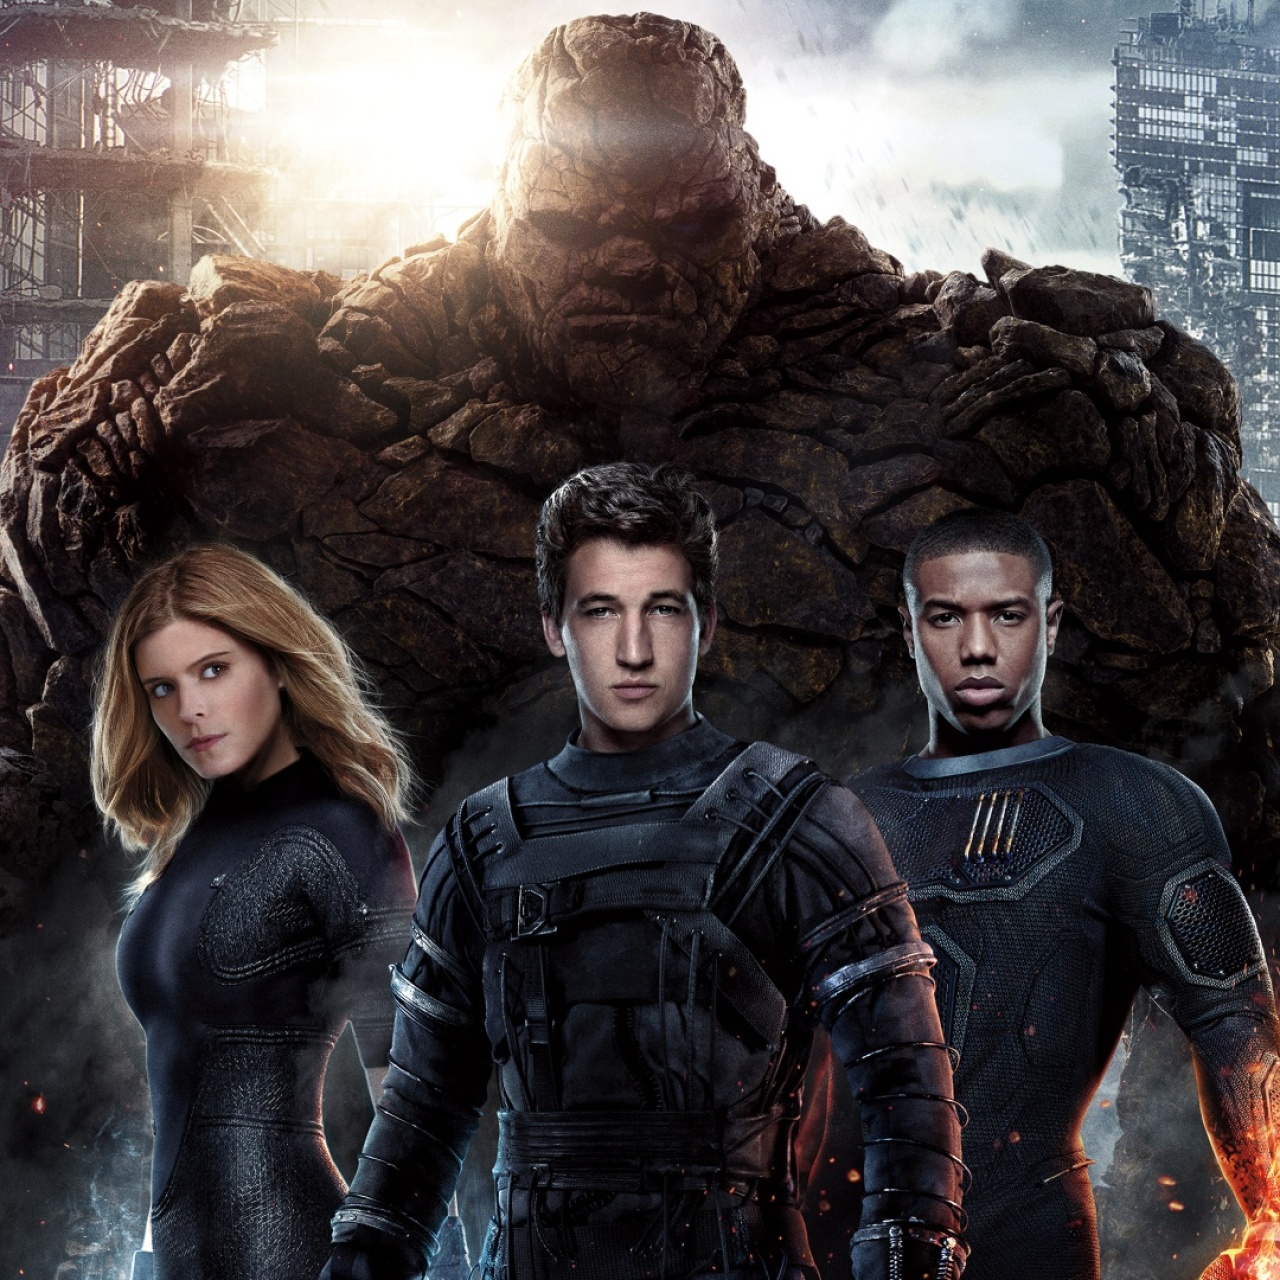 FANTASTIC 4 Officially Ushers in Superhero Fatigue